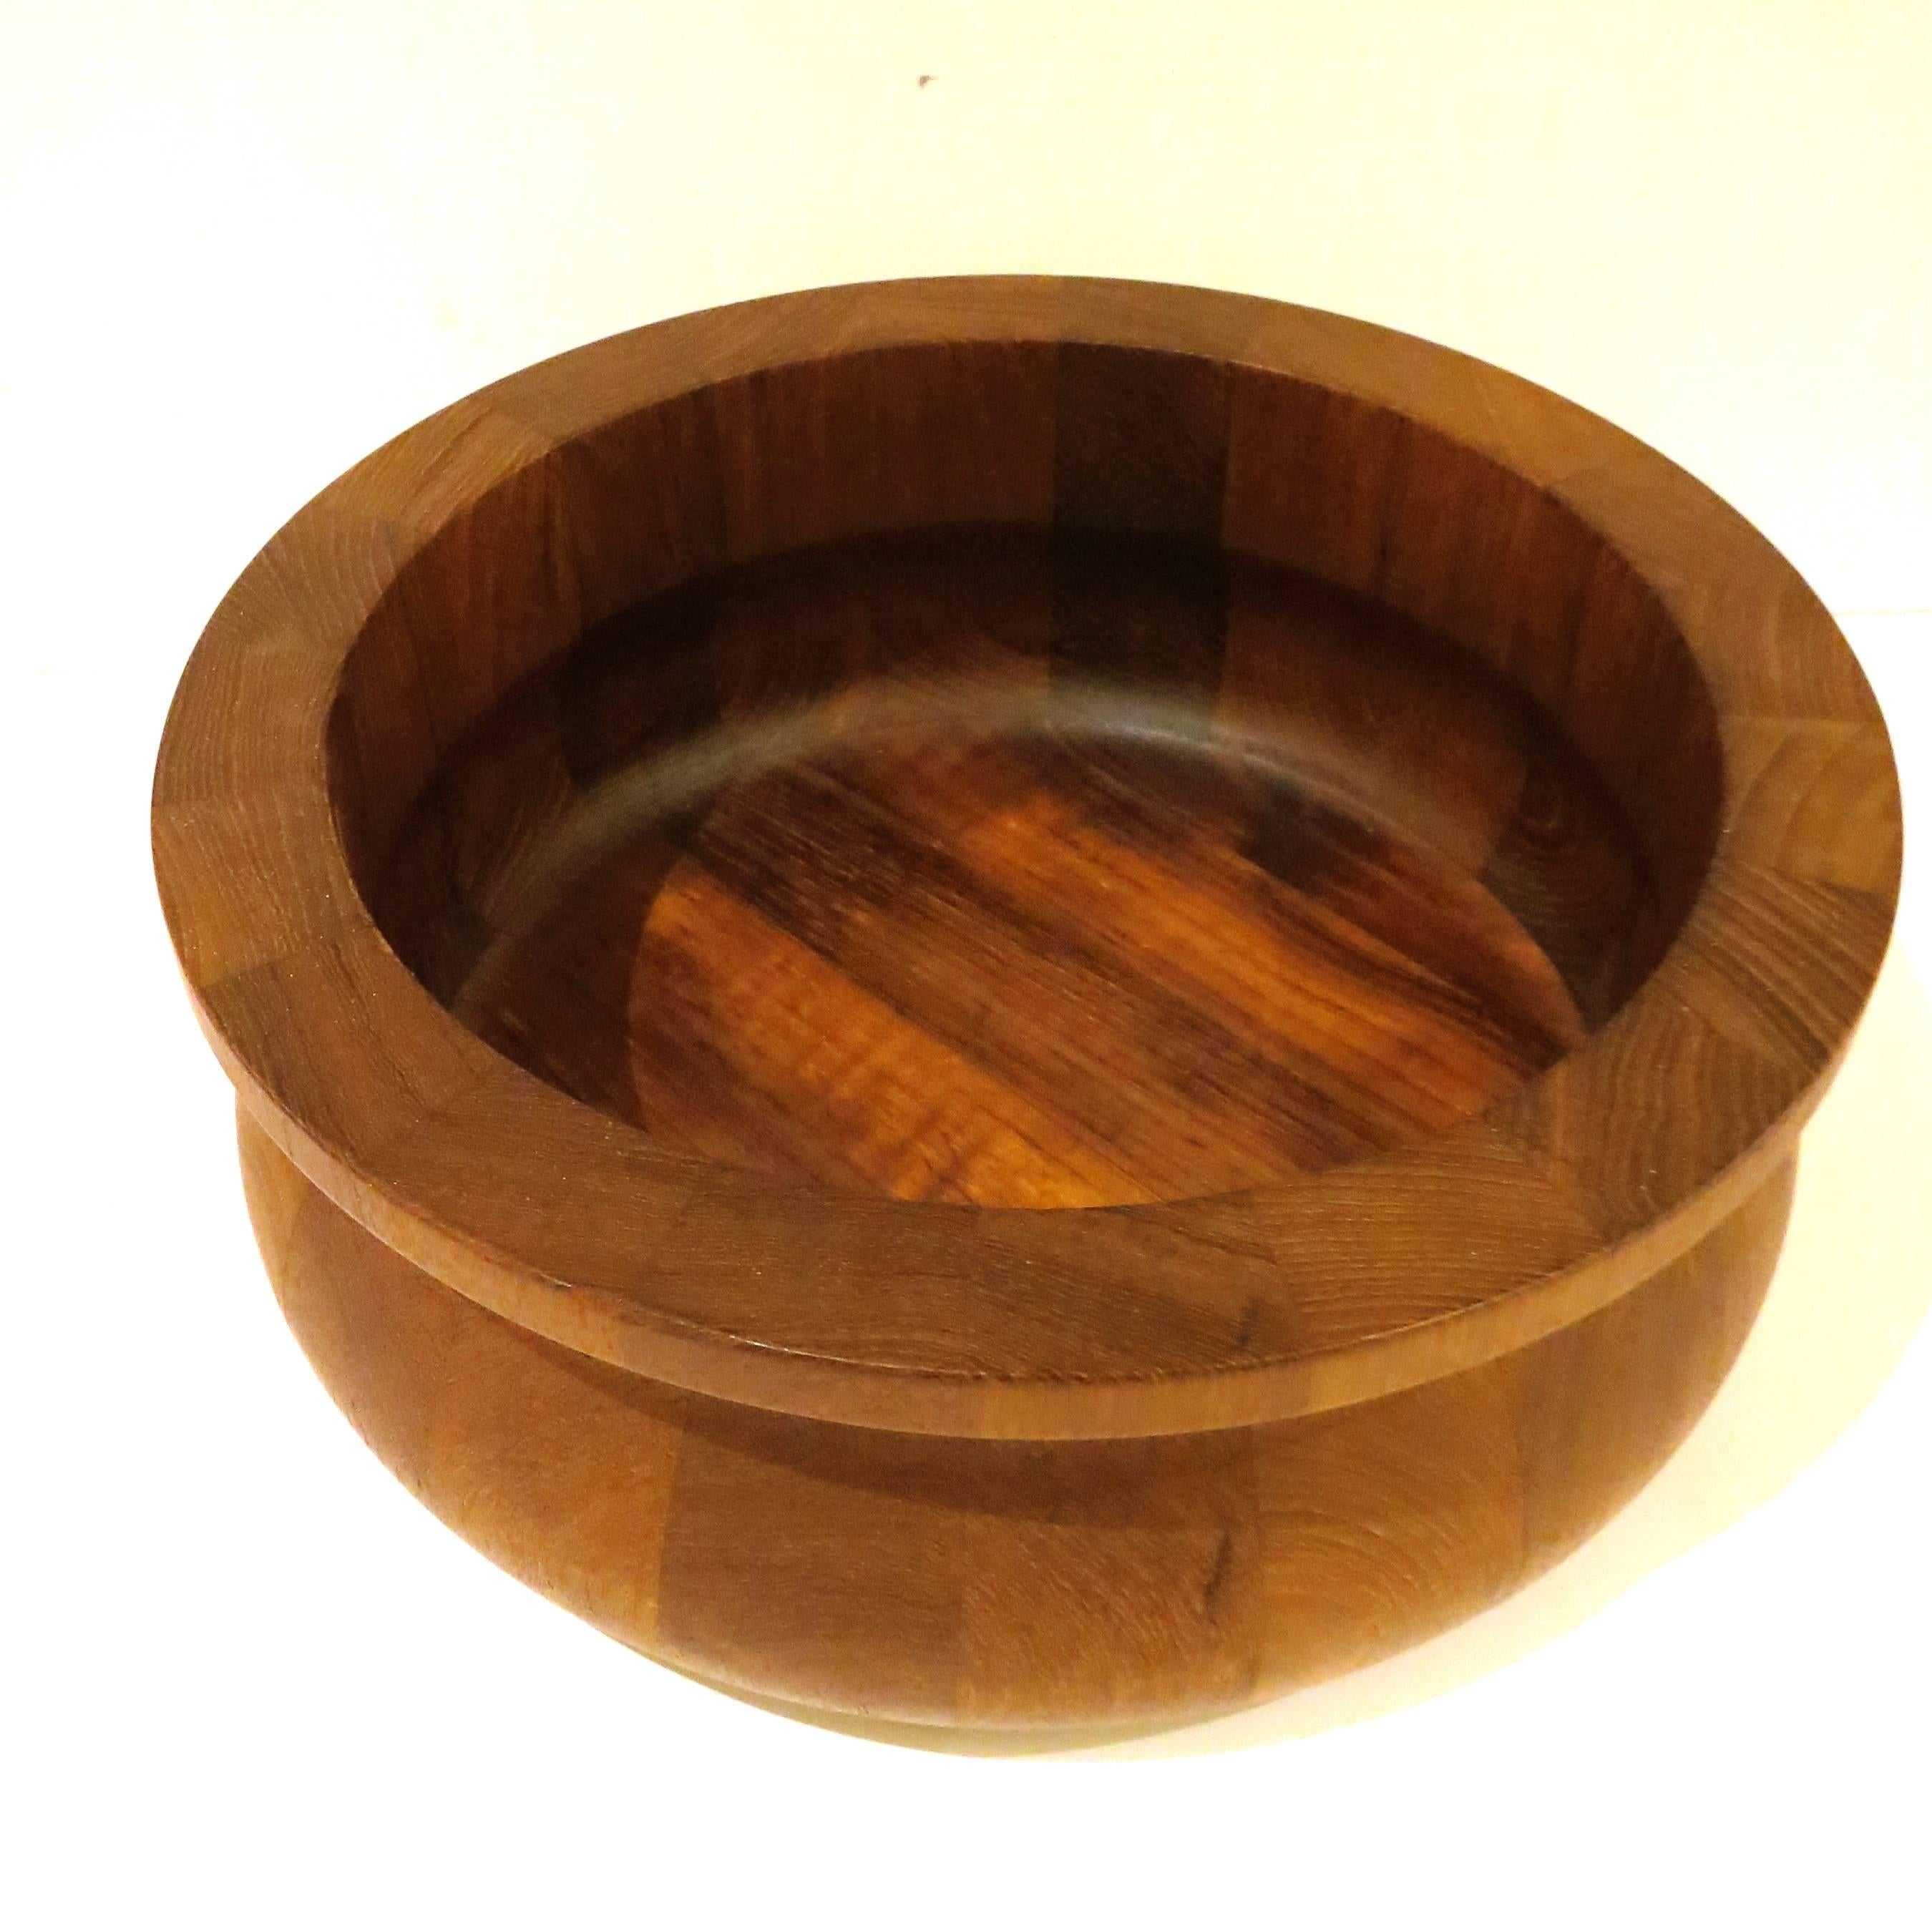 Rare shape on this solid teak, salad bowl designed by Quistgaard for Dansk, circa 1950s. Great condition early production.